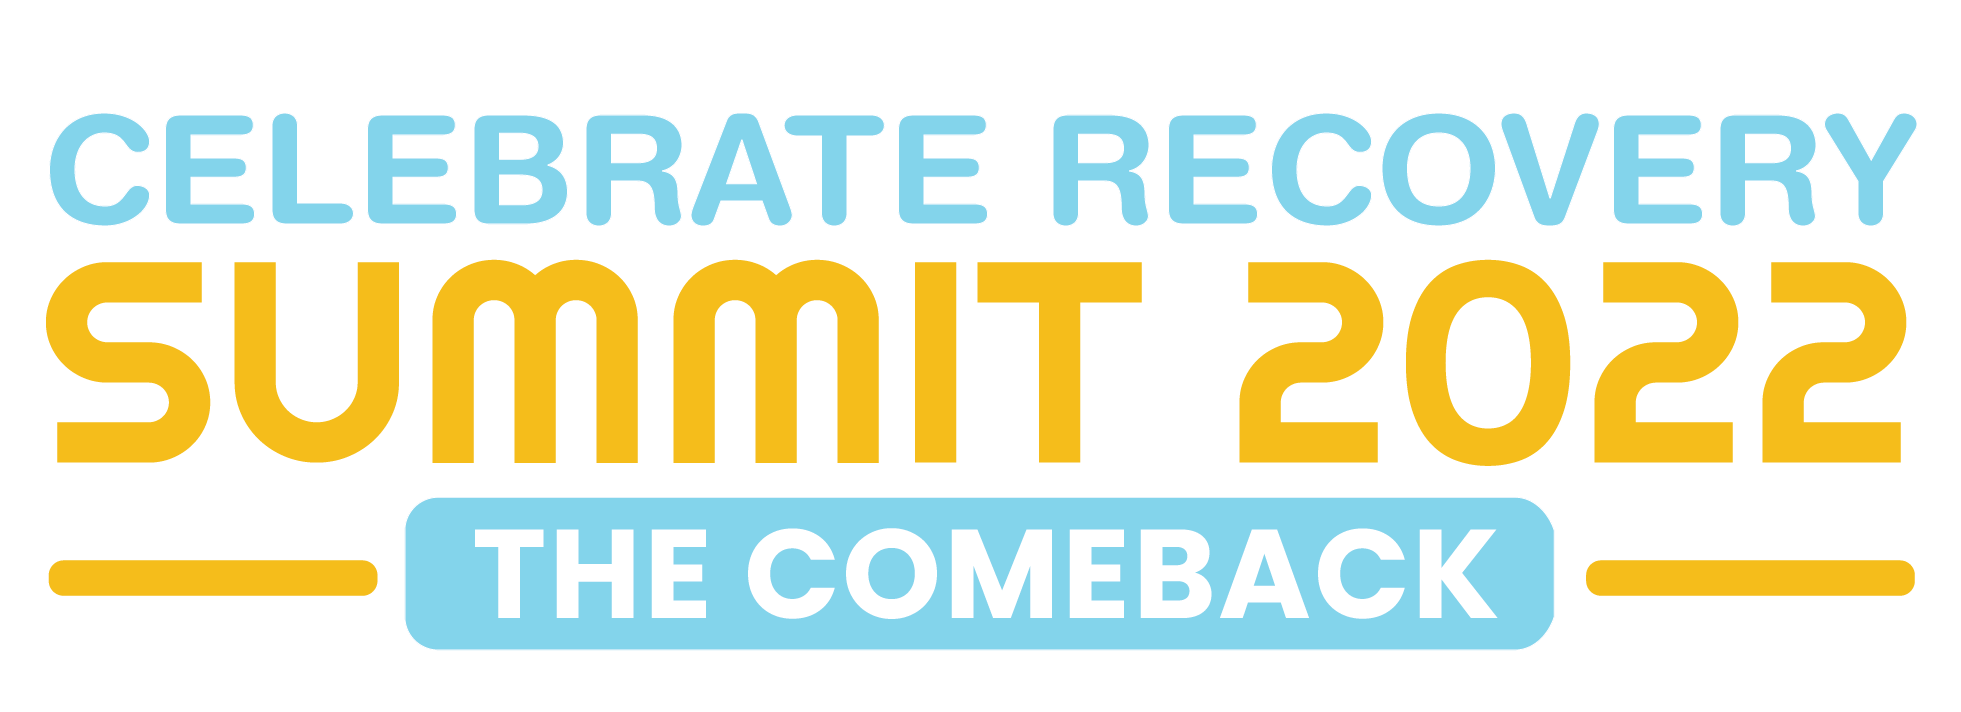 The 2022 Celebrate Recovery Summit!